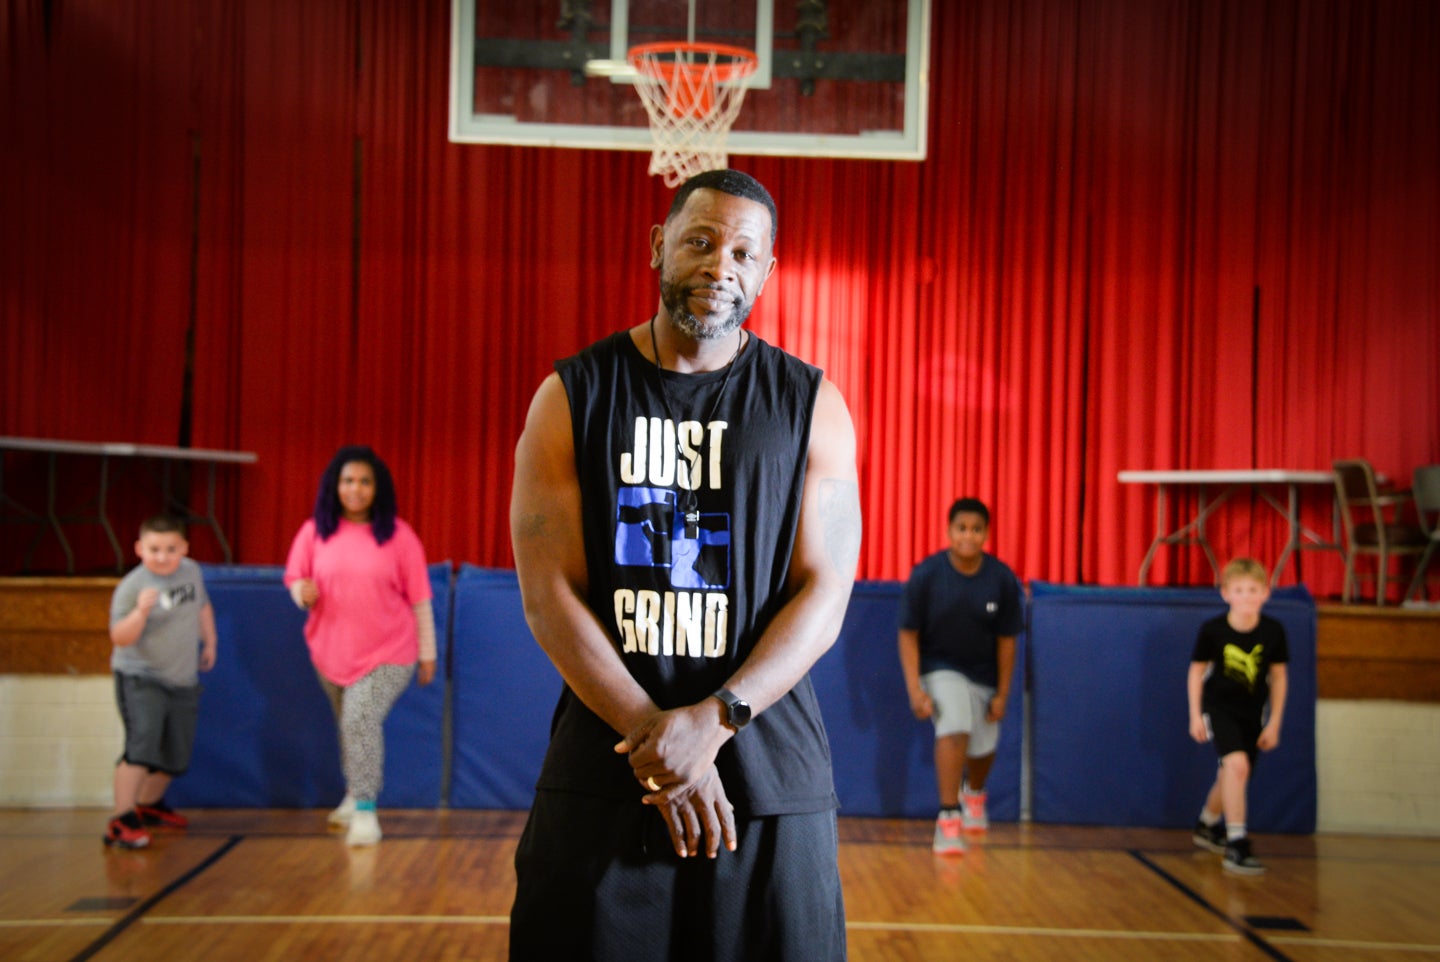 ‘Just Grind’: Roni Robinson ‘Bridging the Gap’ by creating opportunities, connections for youth and area organizations